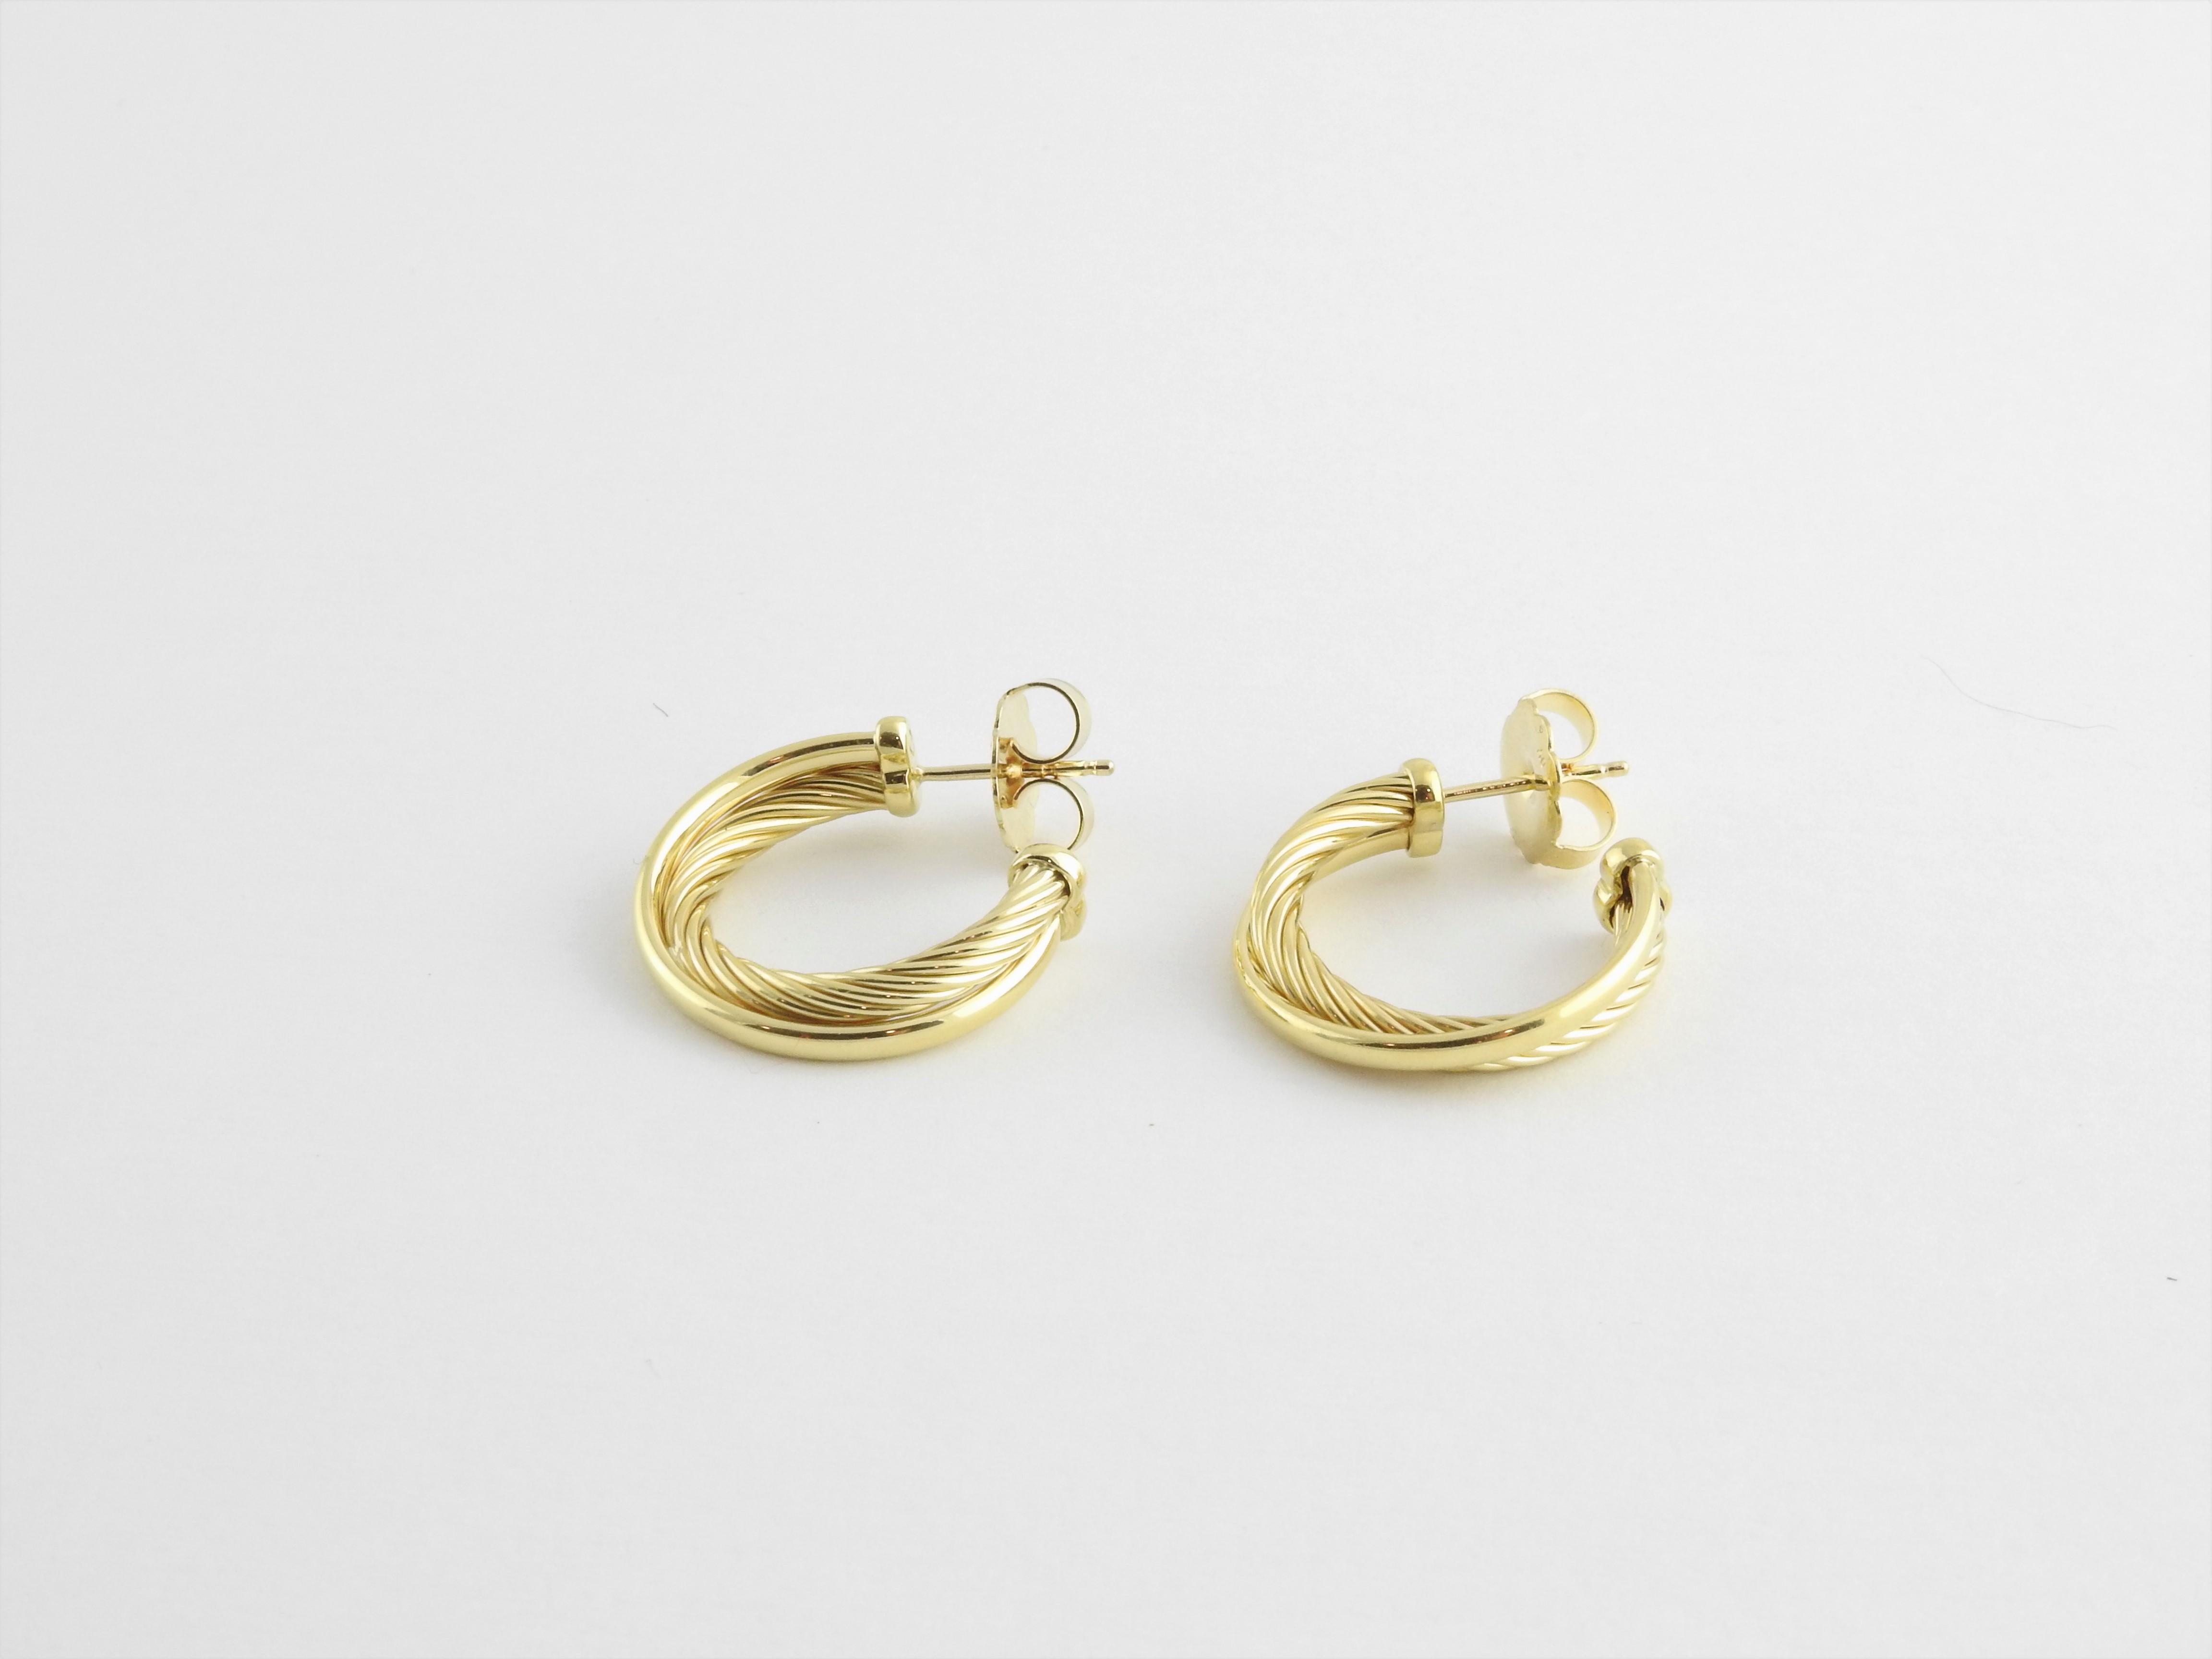 David Yurman 18K Yellow Gold Cable Crossover Hoop Earrings

These authentic David Yurman hoop Earrings are approx. 24 mm in length and 5 mm wide ( 7/8